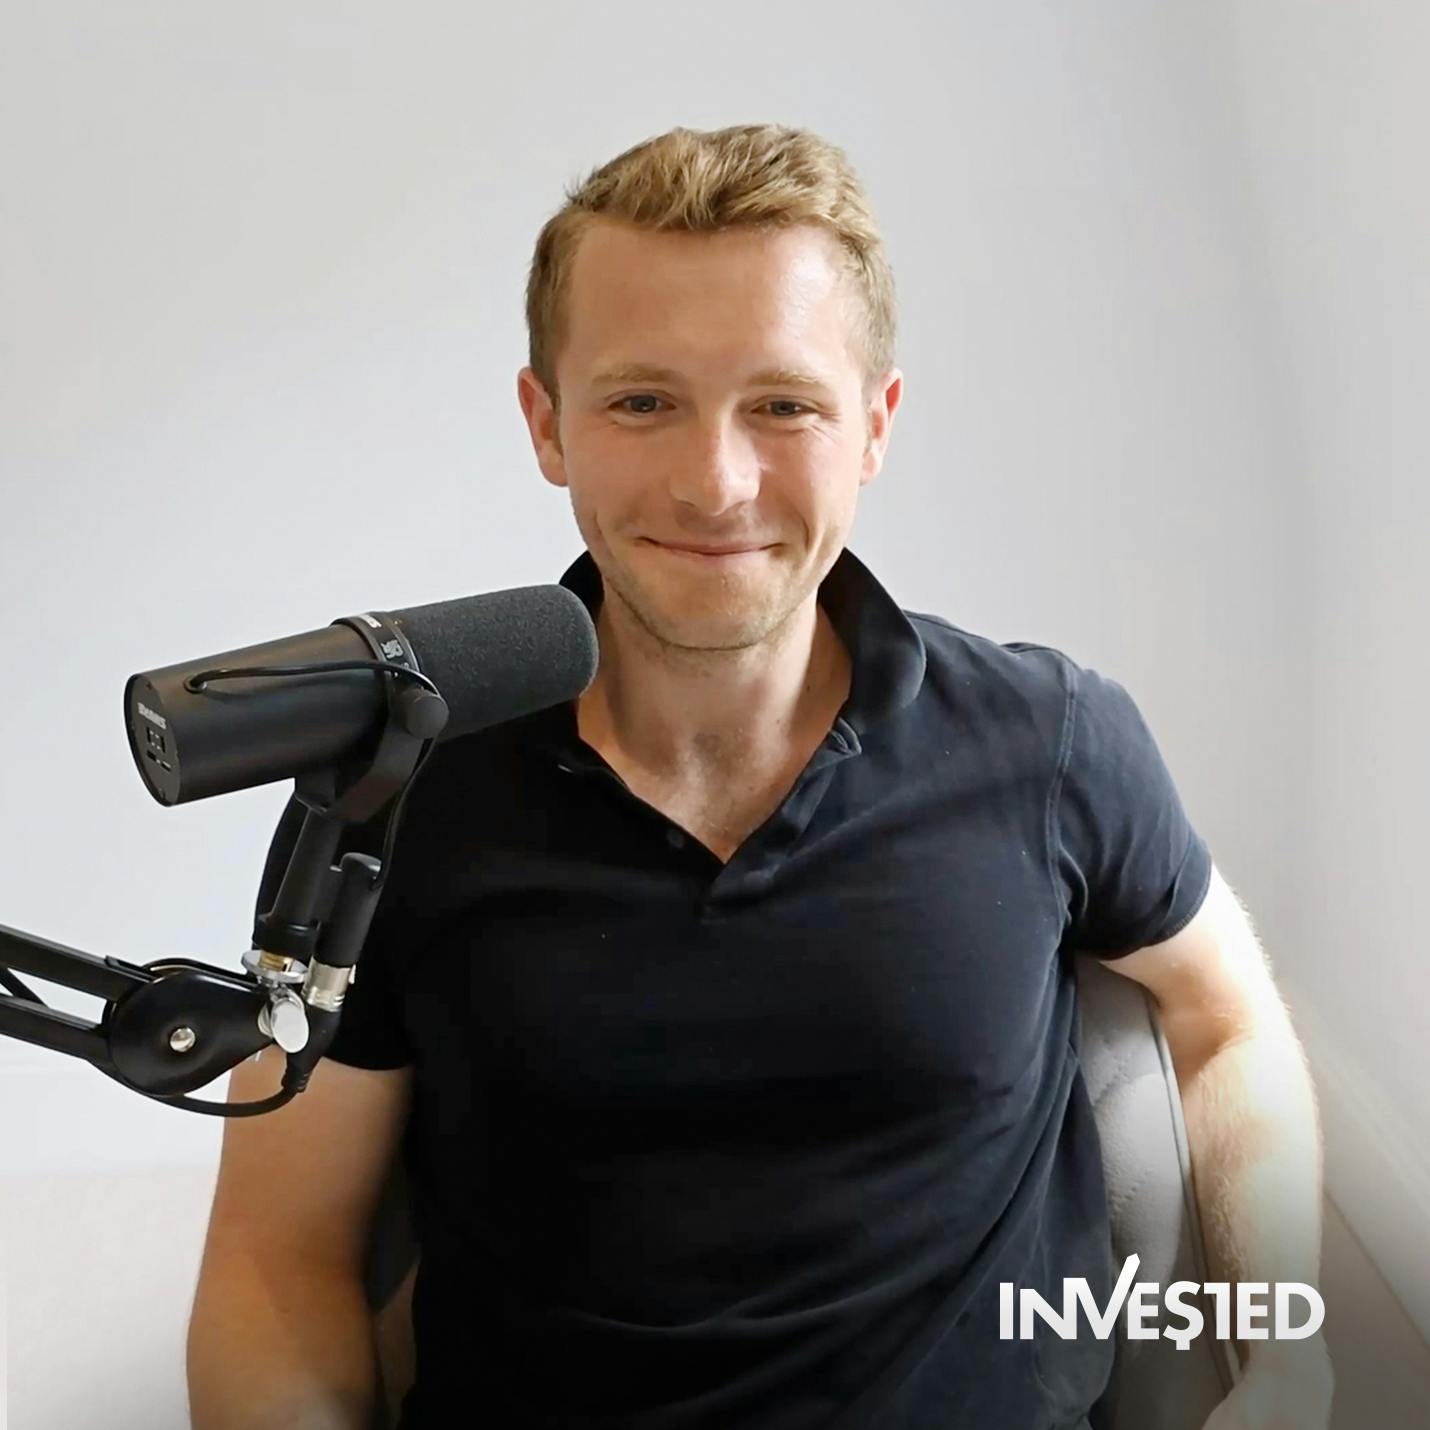 Harry Stebbings on Starting 20VC, Being Underestimated, Investing, and Wealth vs. Happiness